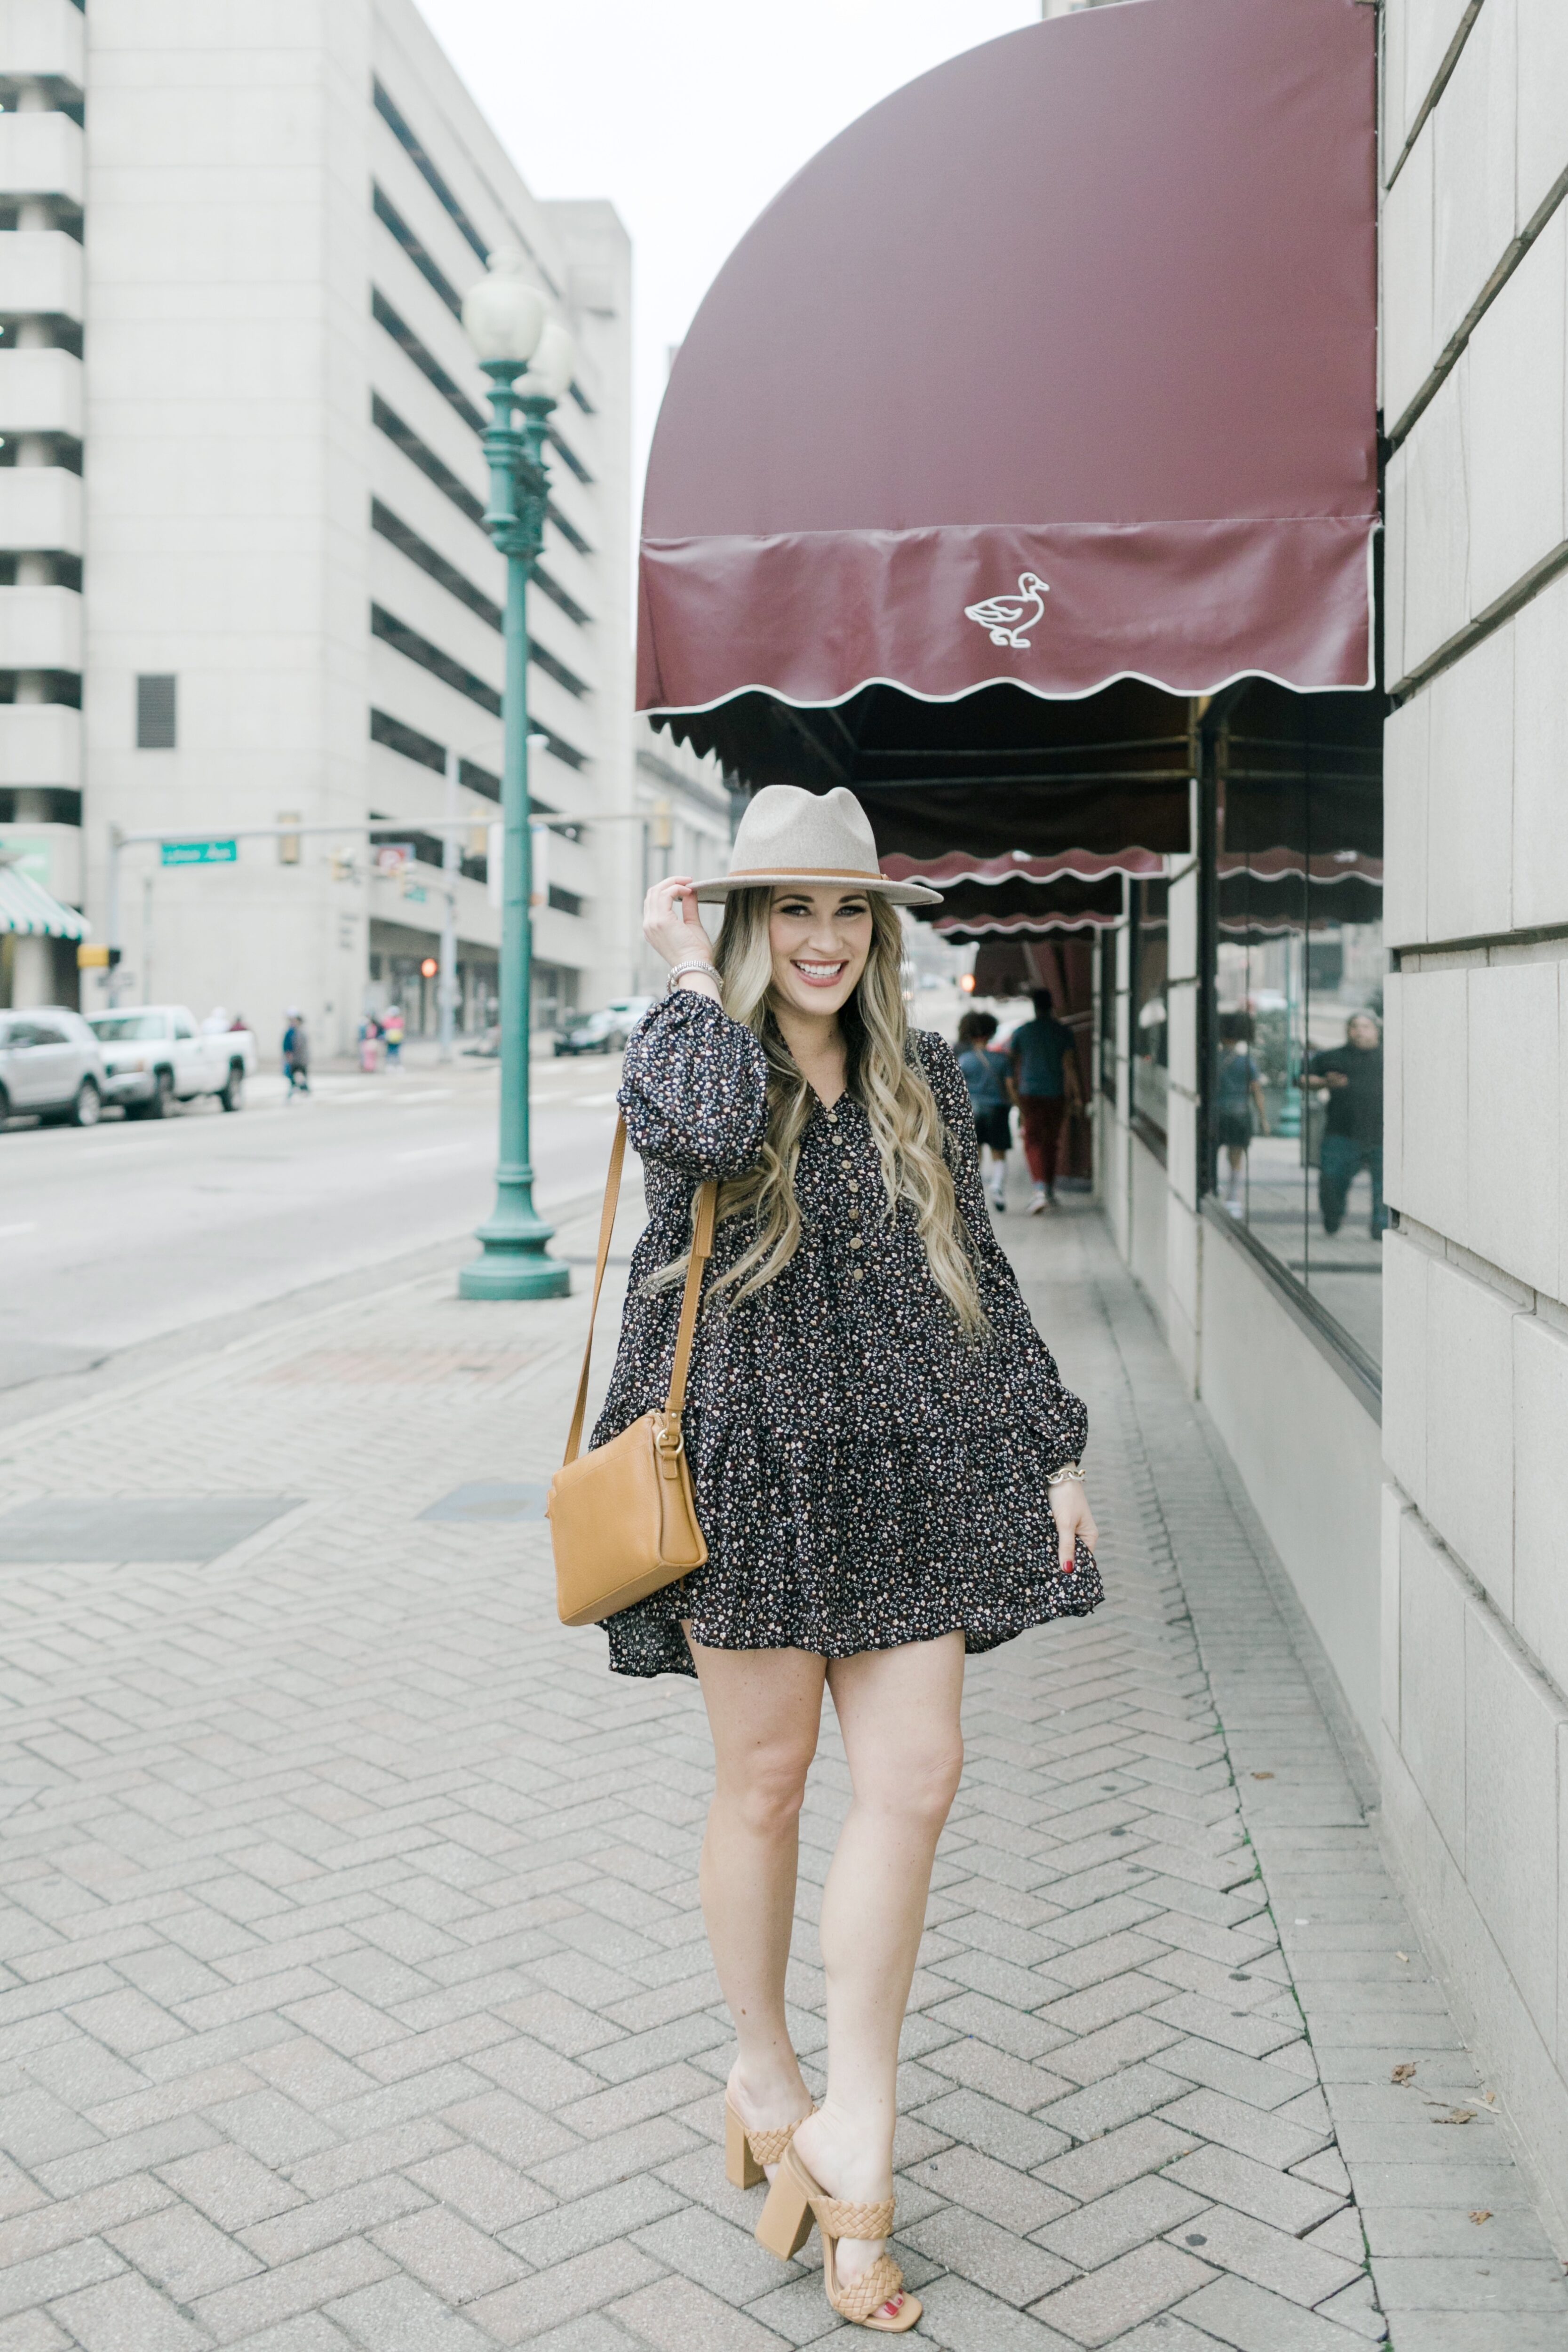 How to Wear a Dress in Winter, tips featured by top US mom fashion blogger, Walking in Memphis in High Heels.